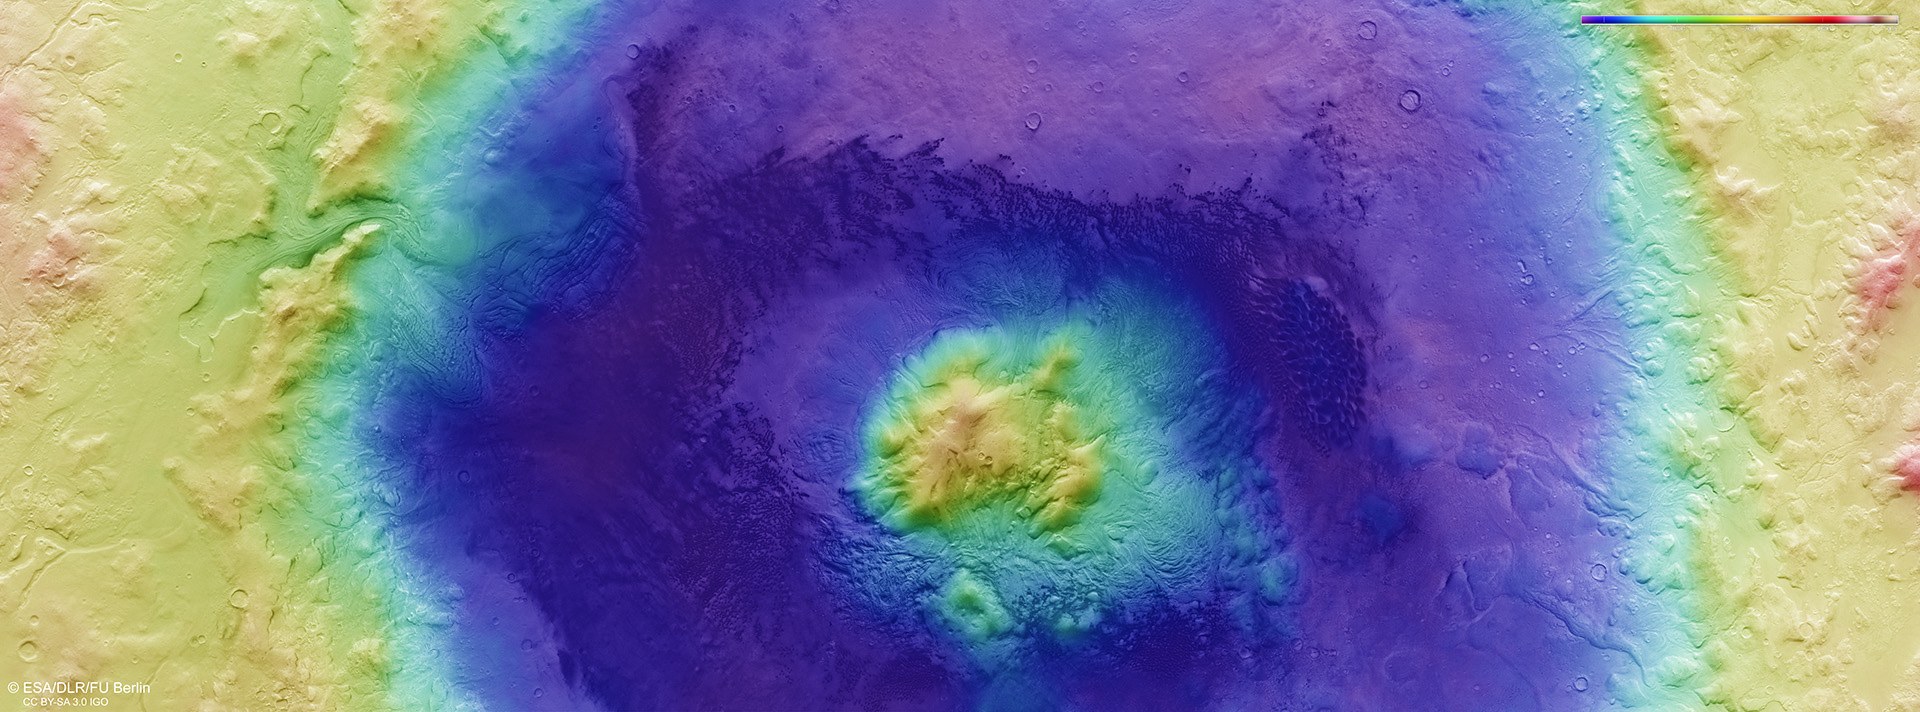 Topographic image map of Moreux Crater